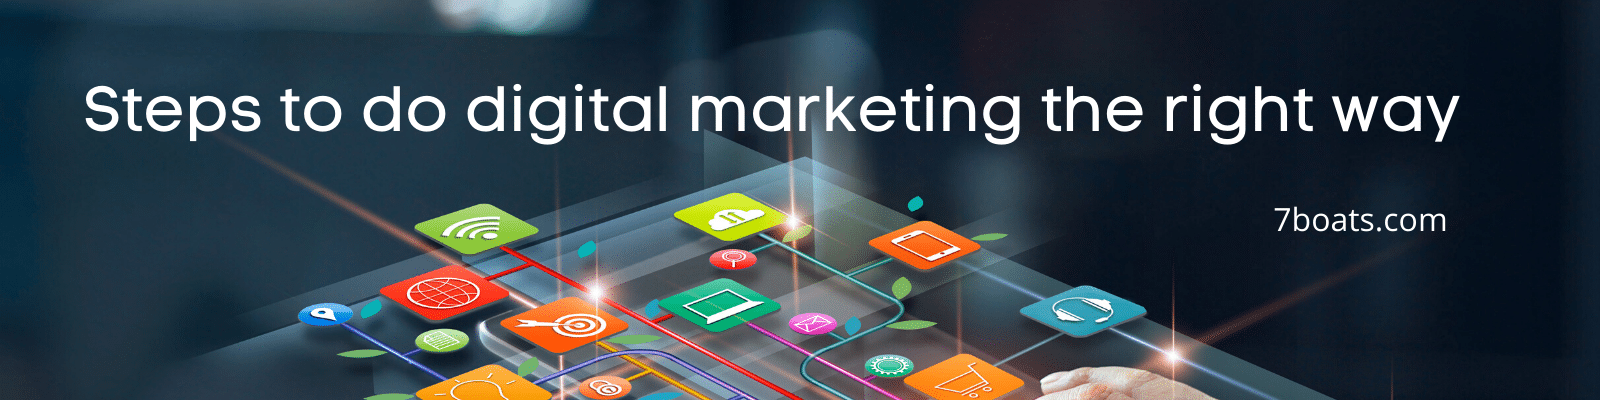 How to do digital marketing the right way? - The steps in digital marketing